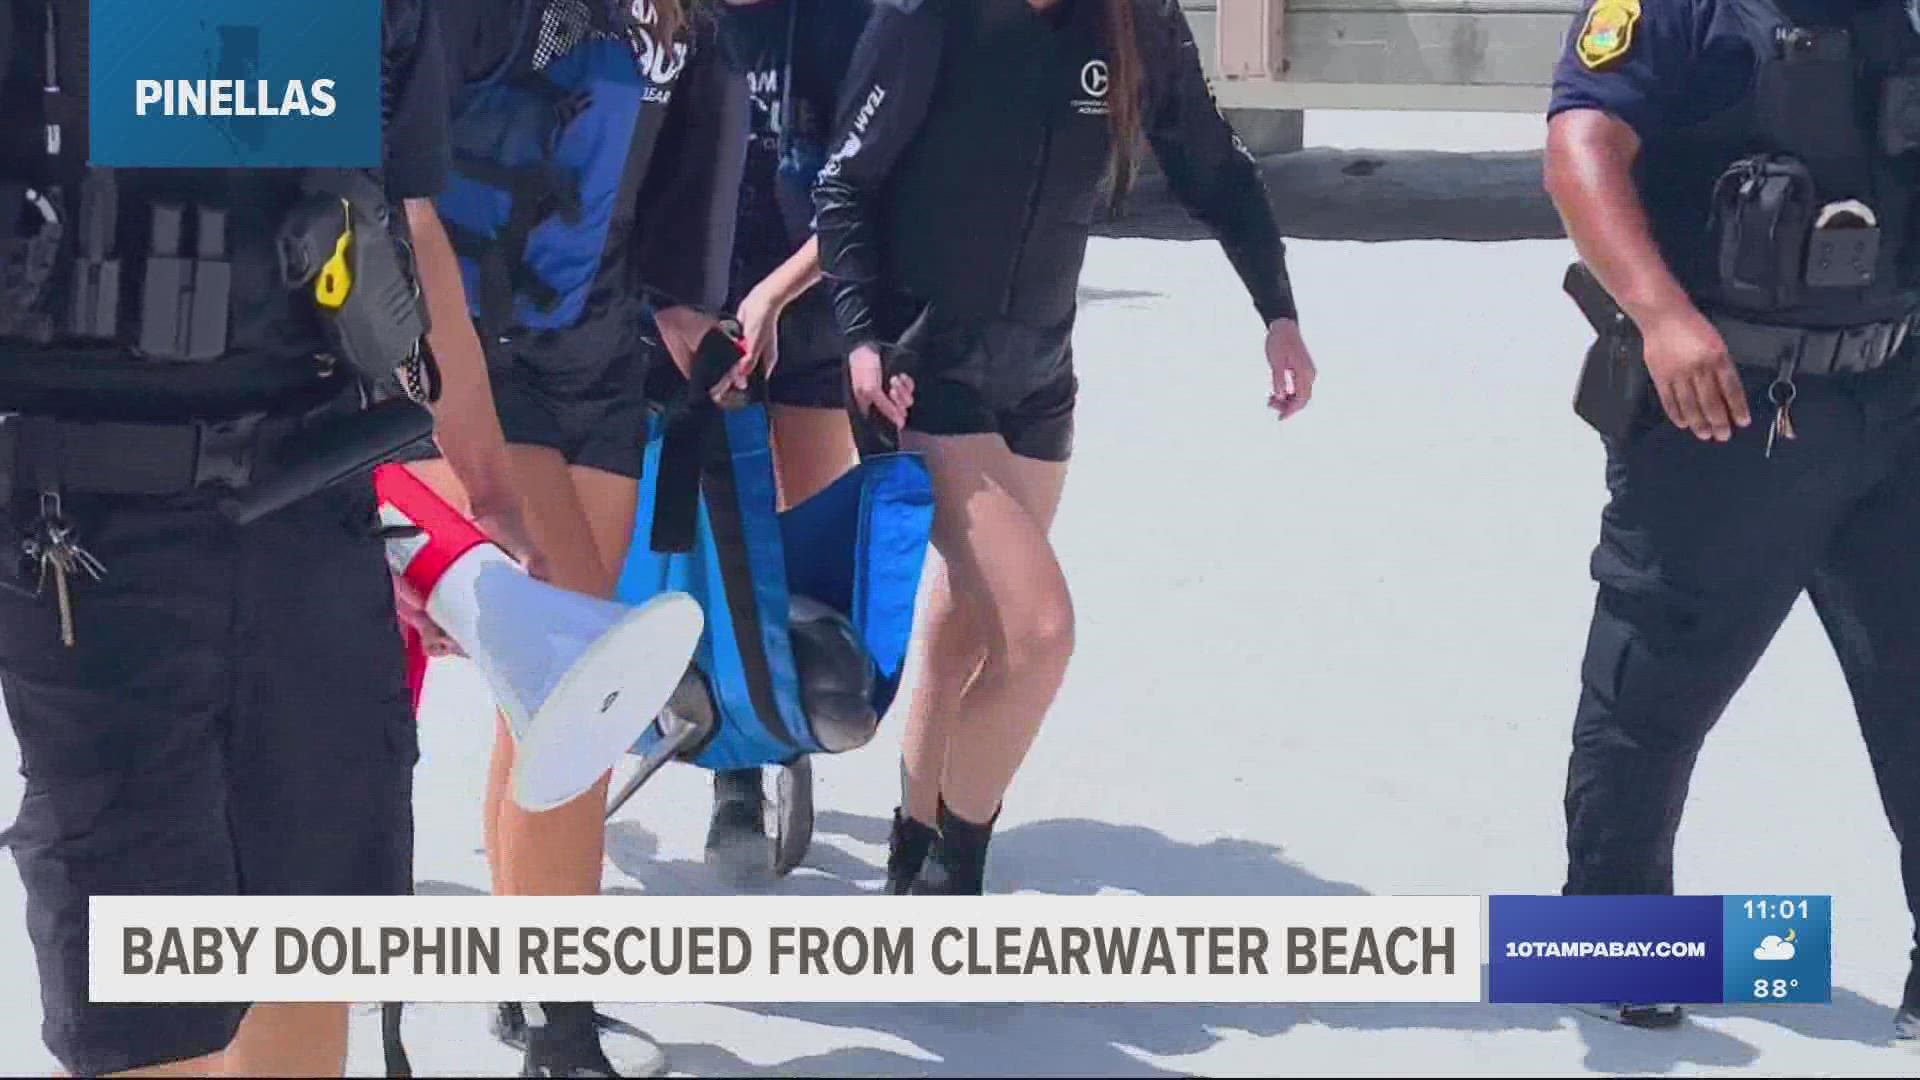 Clearwater Marine Aquarium attempted to release the baby dolphin just before 3:15 p.m. but was unable to reunite the calf with its mother.